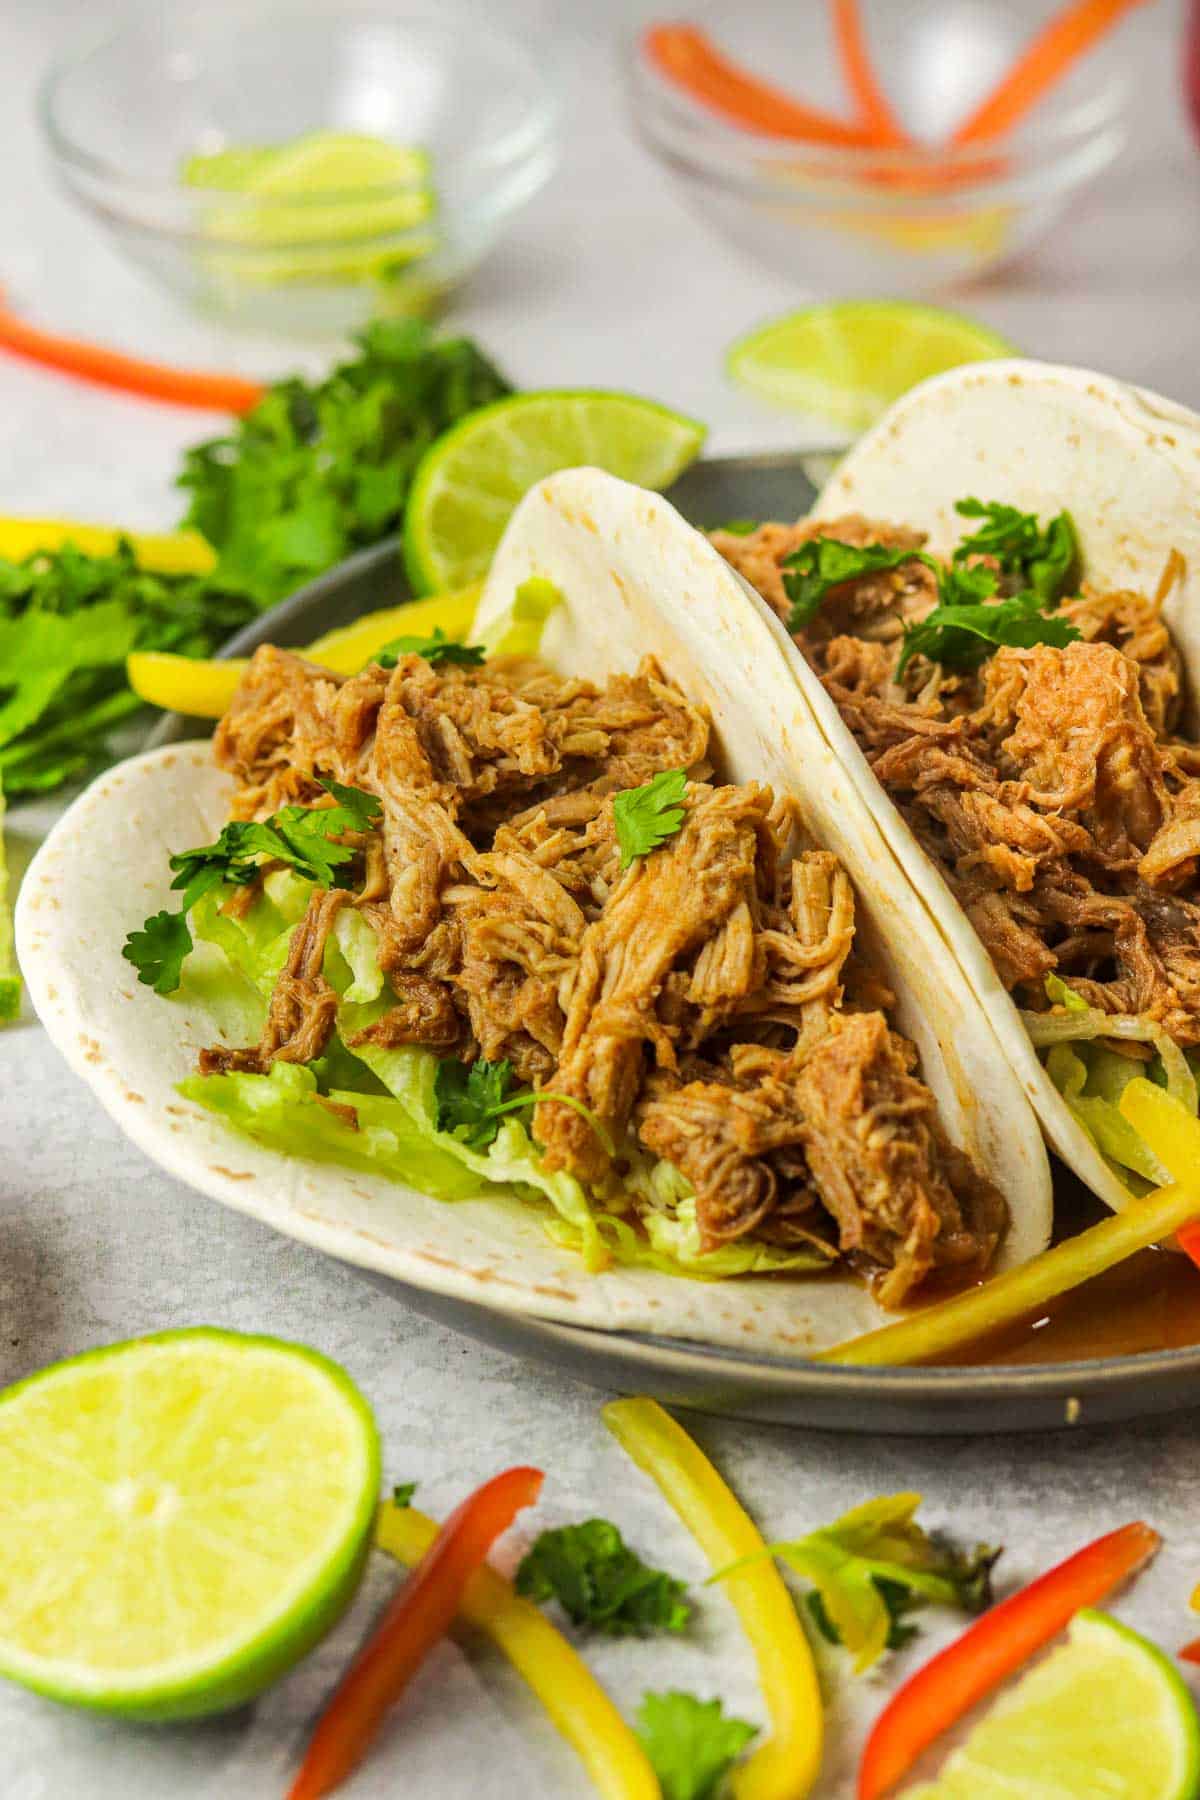 Slow cooker Pork Barbacoa tacos with cilantro and peppers.